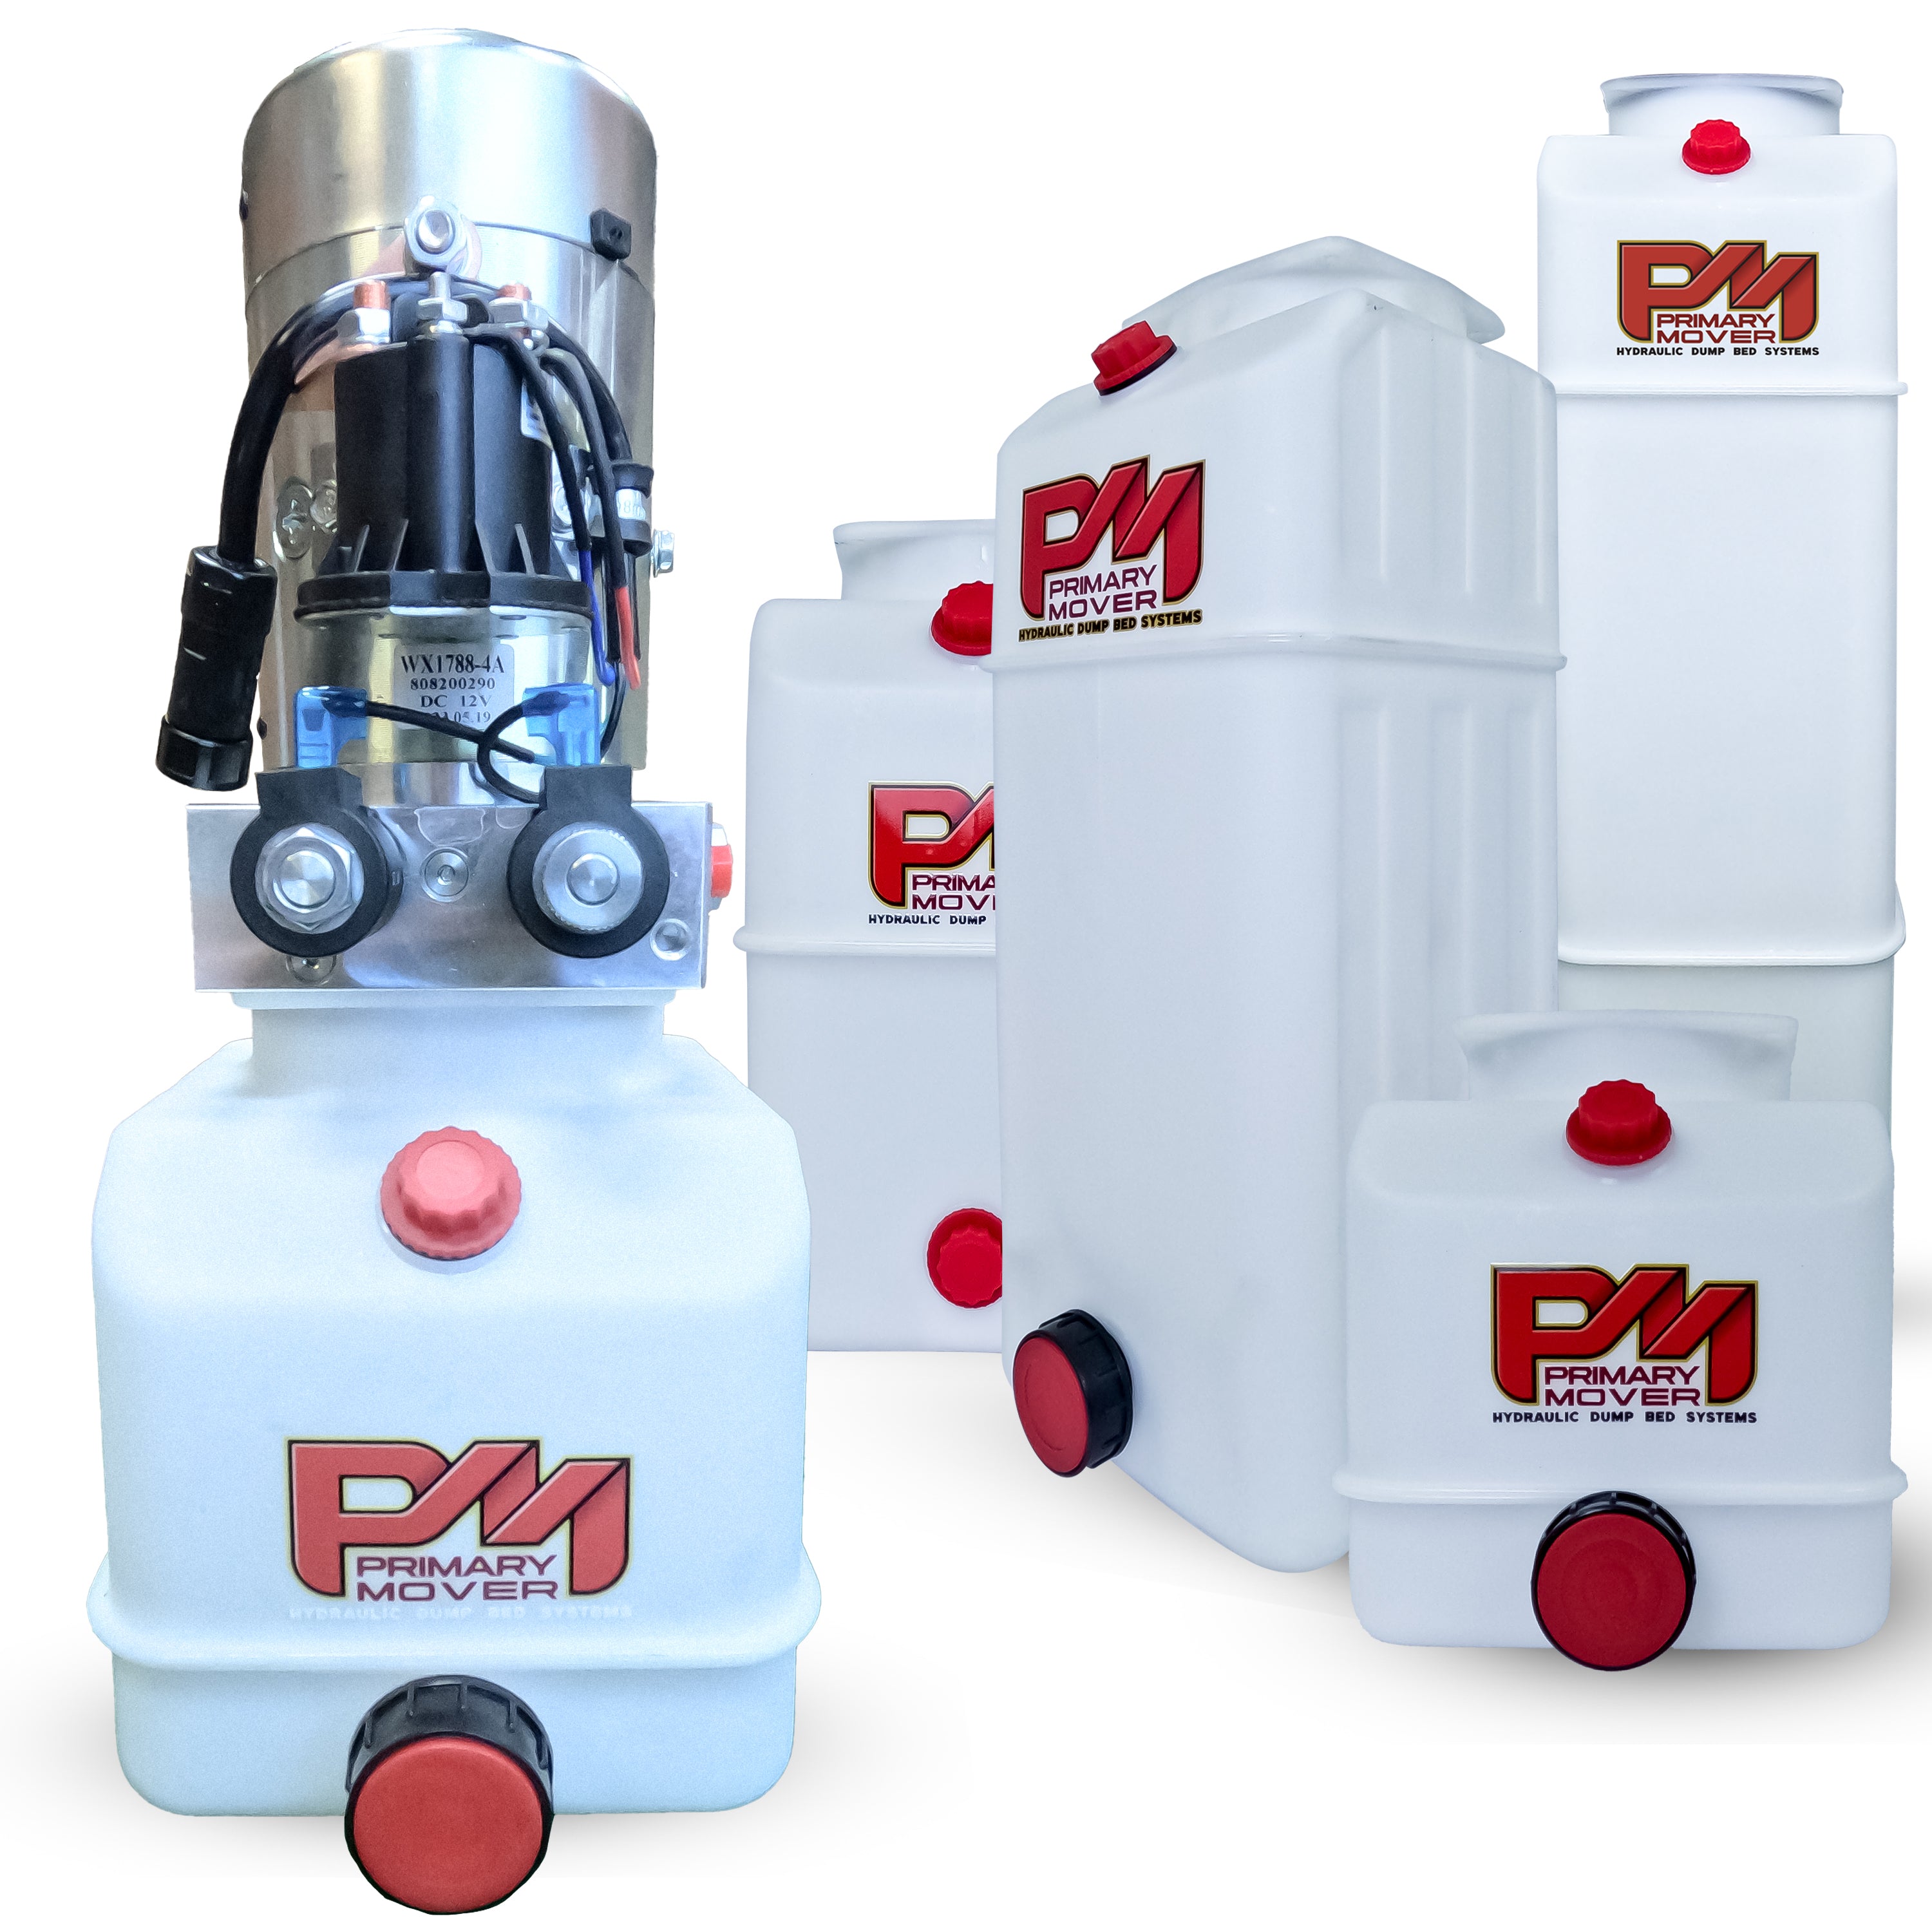 DLH 12V Double-Acting Hydraulic Pump with Poly Reservoir, shown with white containers, red labels and lids, designed for efficient hydraulic dump bed operation.